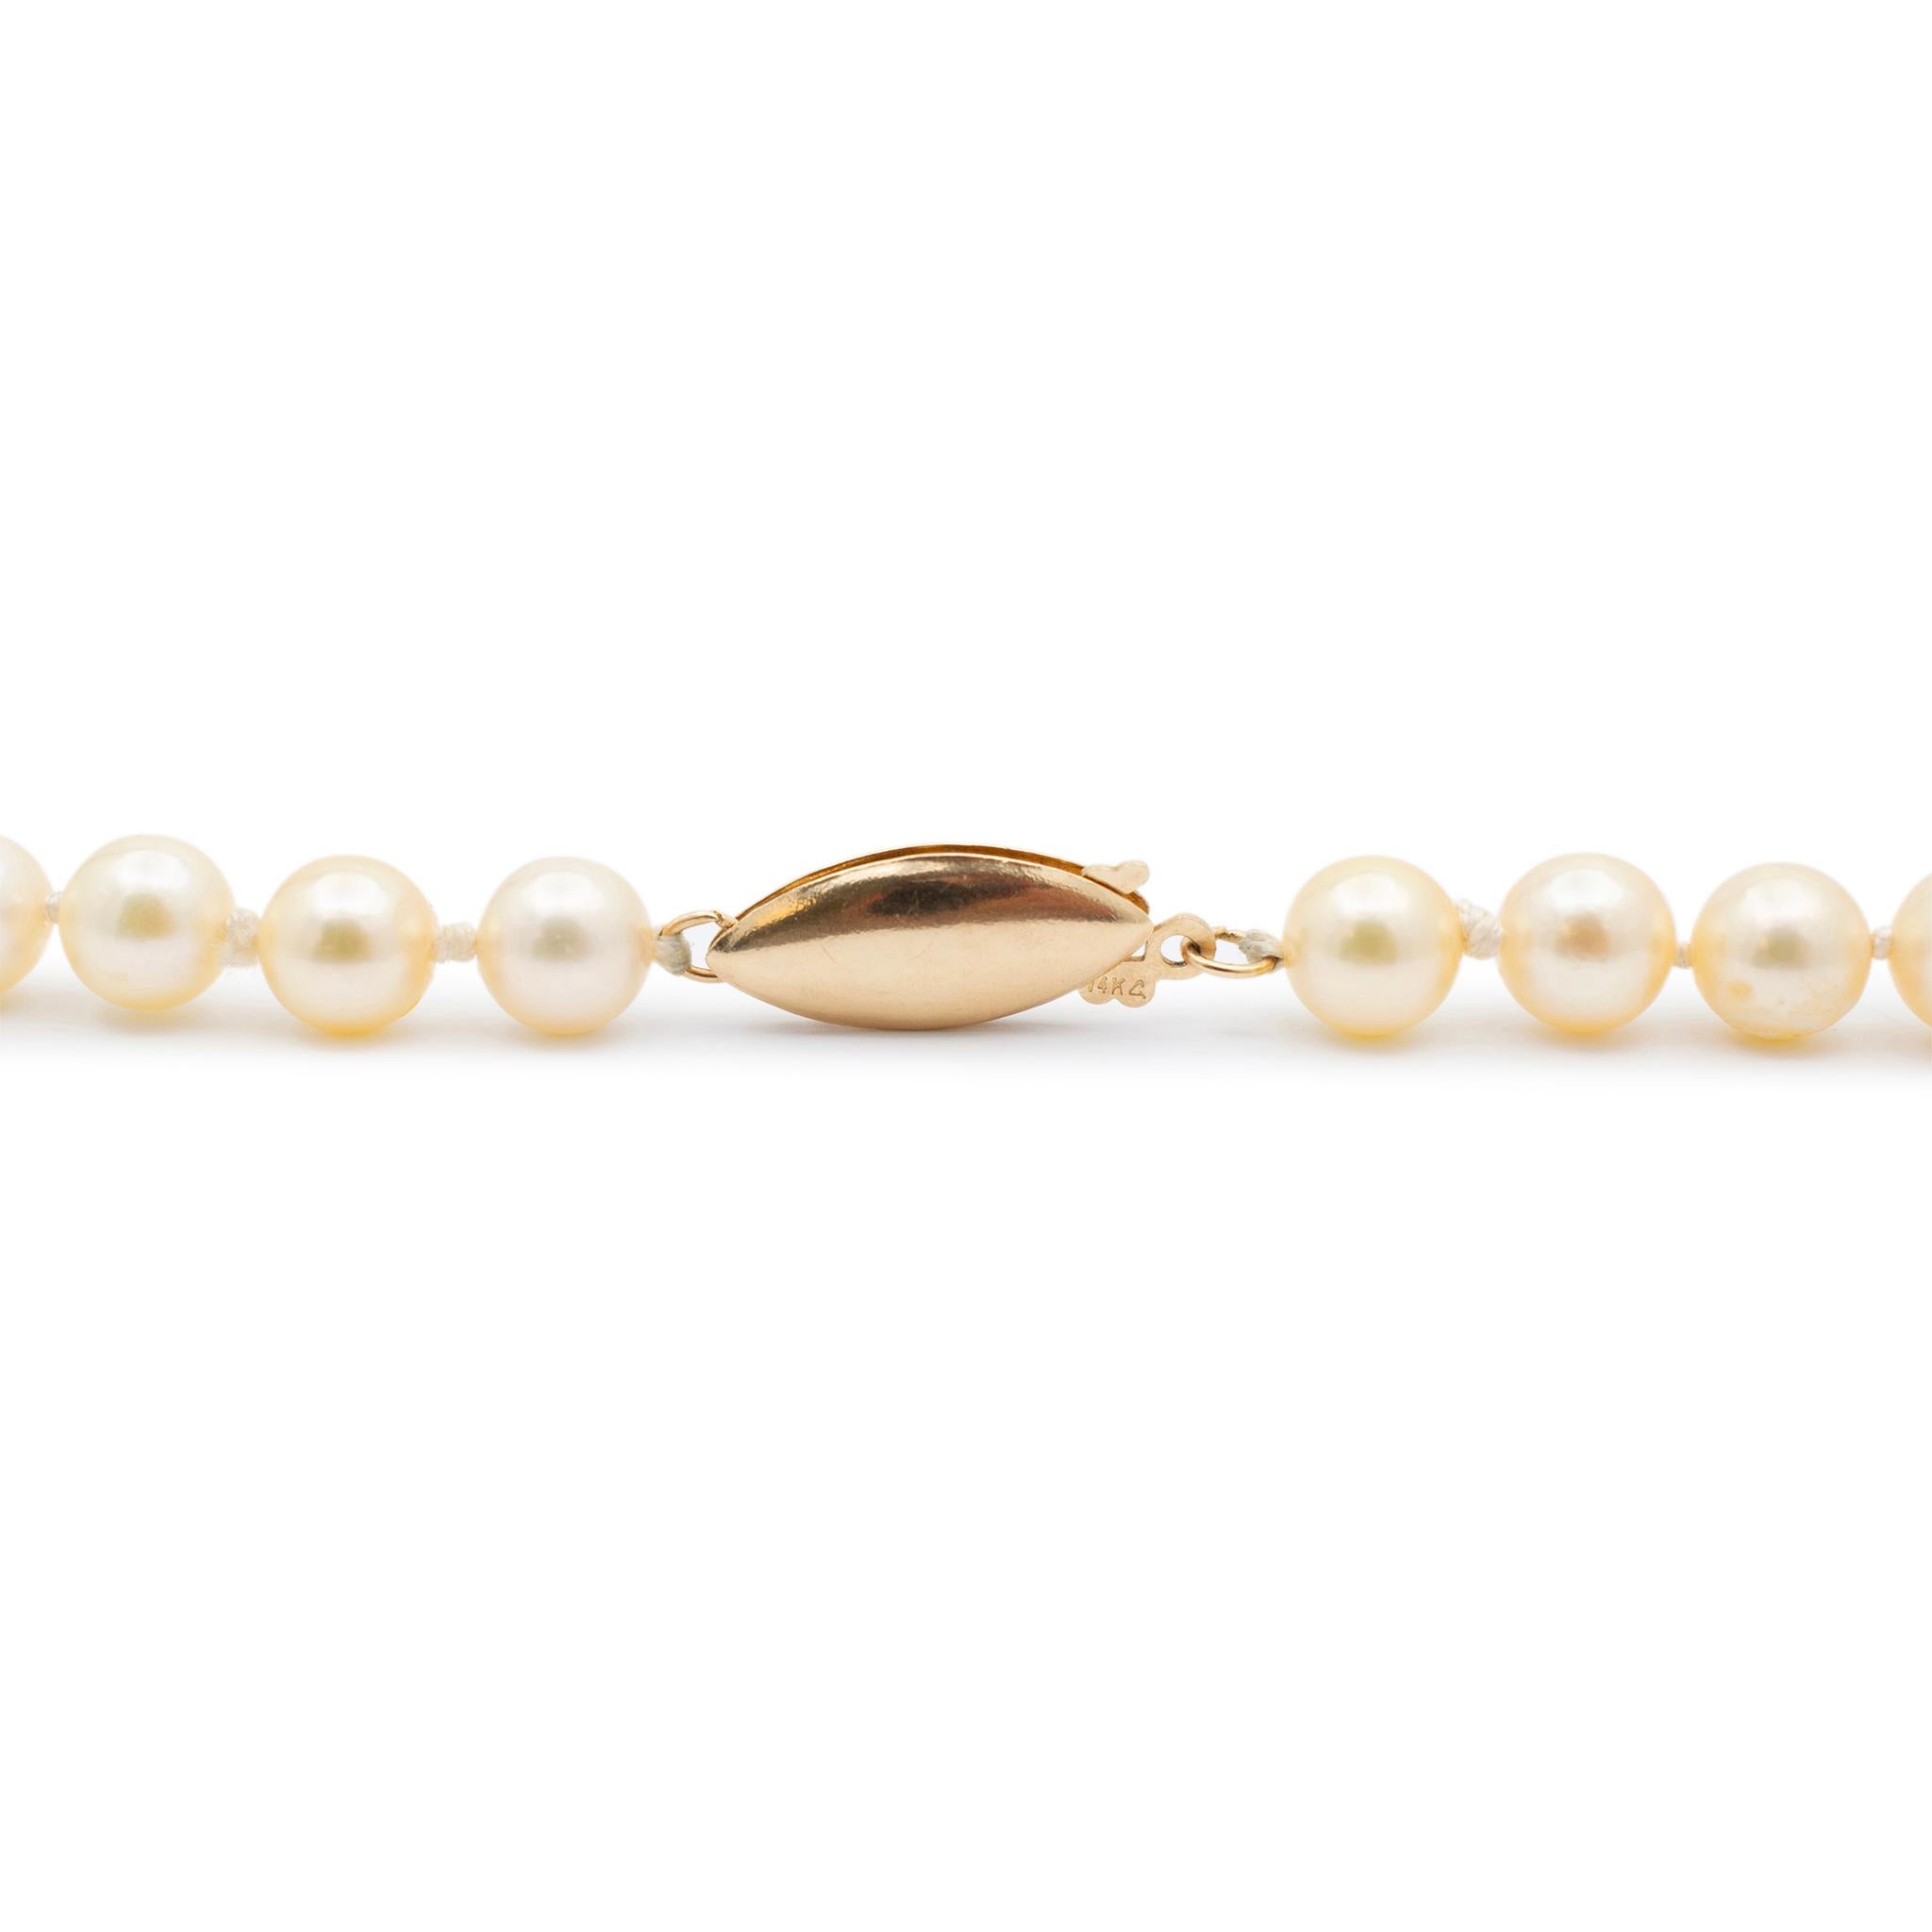 Round Cut Ladies Vintage Natural Pearl Beads Cocktail Chain Necklace With 14K Yellow Gold For Sale